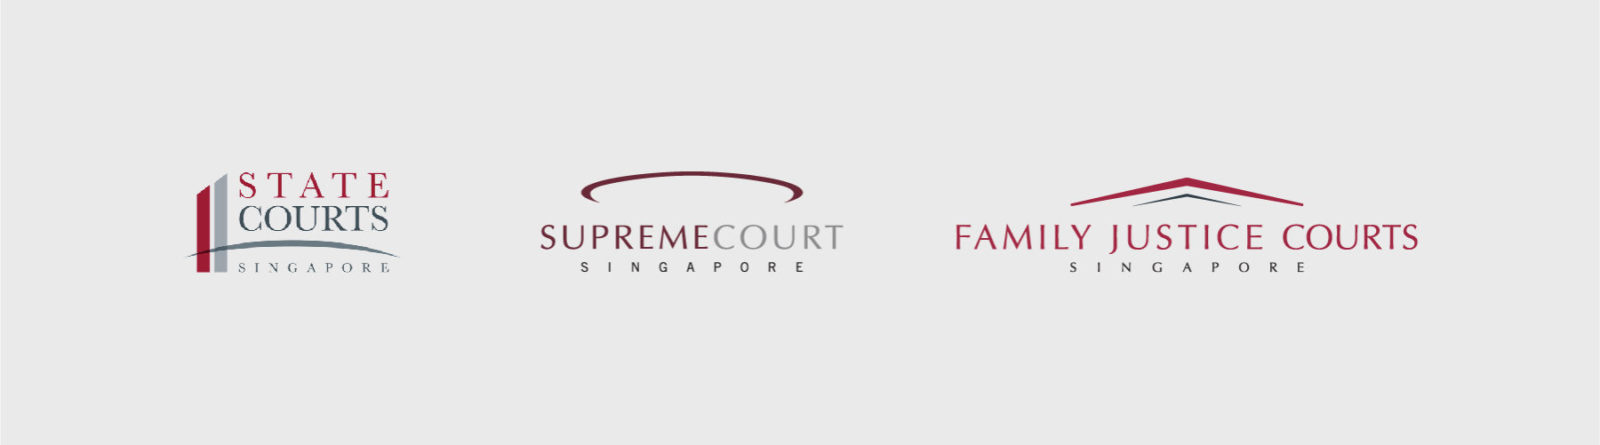 The Court of Justices of Singapore Logos